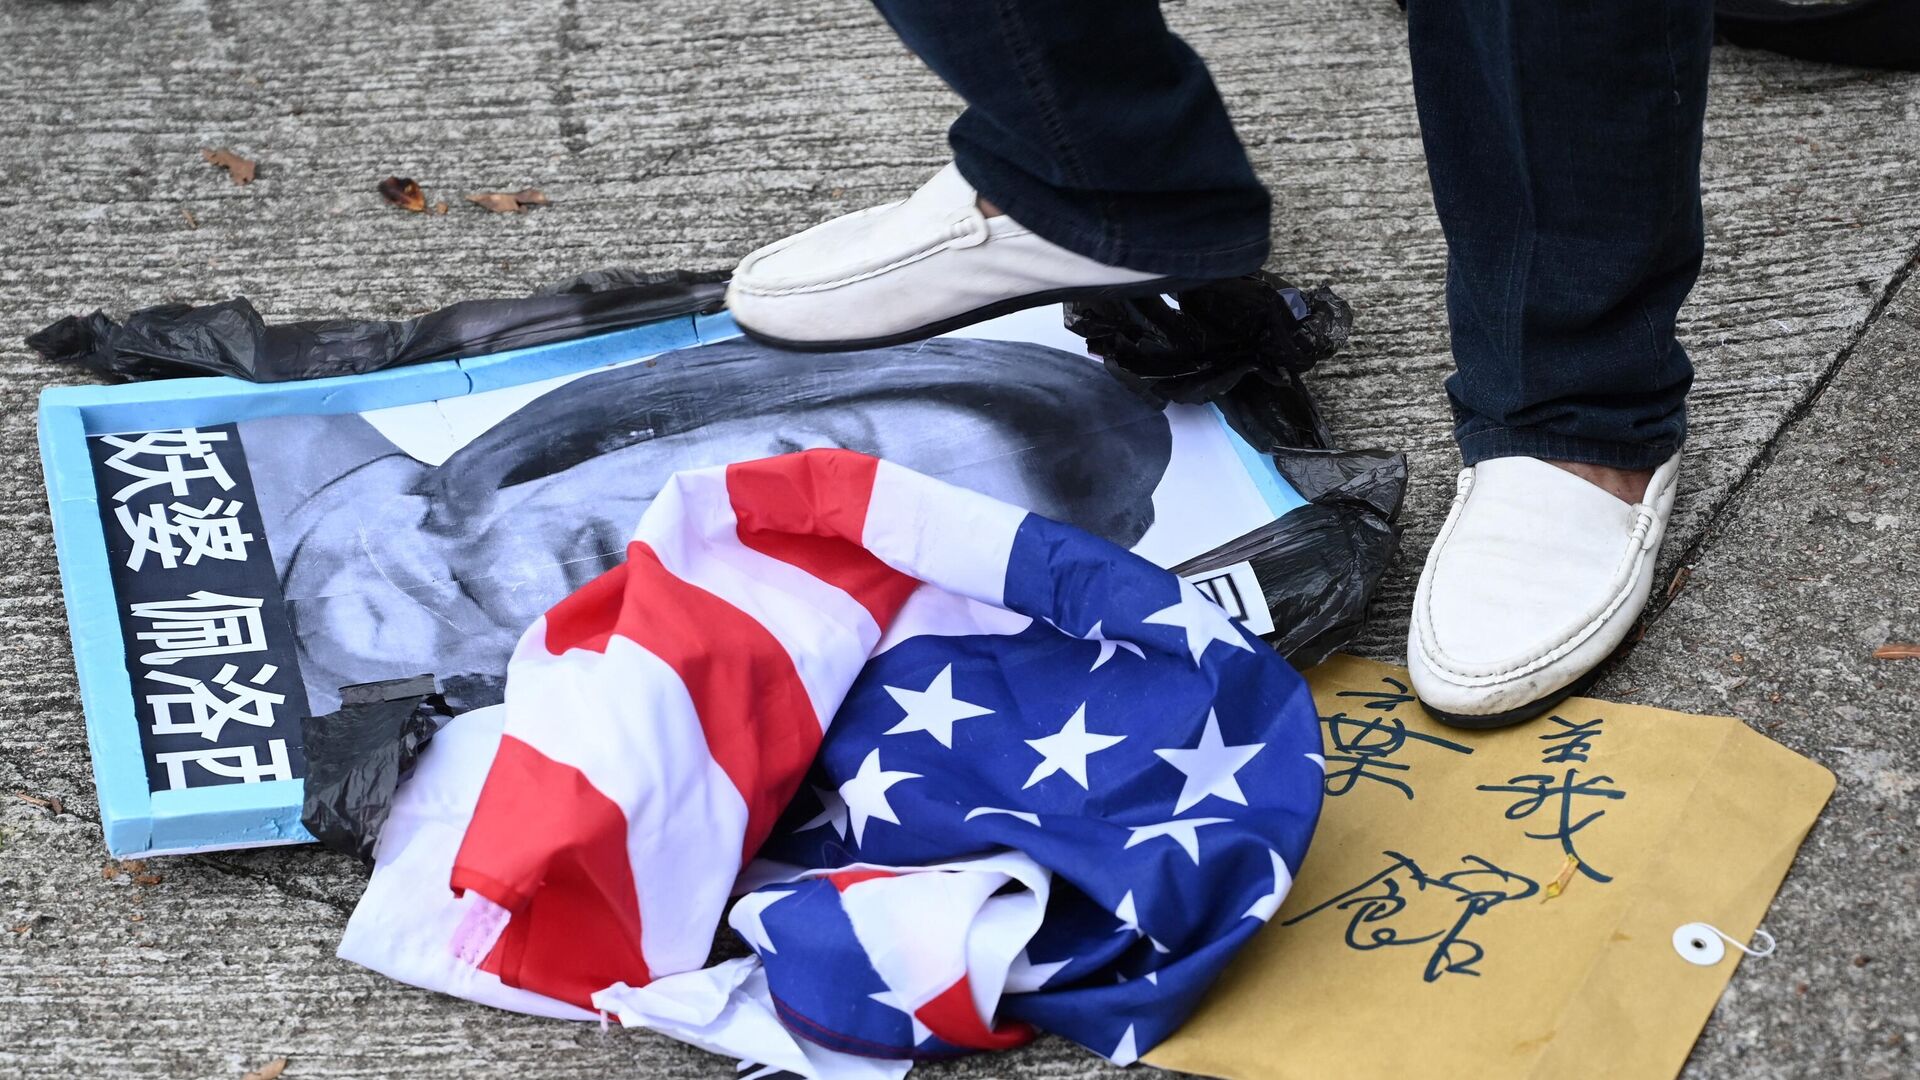 A pro-Beijing protester stamps on an image depicting the US House Speaker Nancy Pelosi and the US flag at a protest outside the US Consulate in Hong Kong on August 3, 2022 after Pelosi arrived in Taiwan late on August 2, 2022 as part of a tour of Asia that has inflamed tensions between the US and China.  - Sputnik International, 1920, 06.08.2022